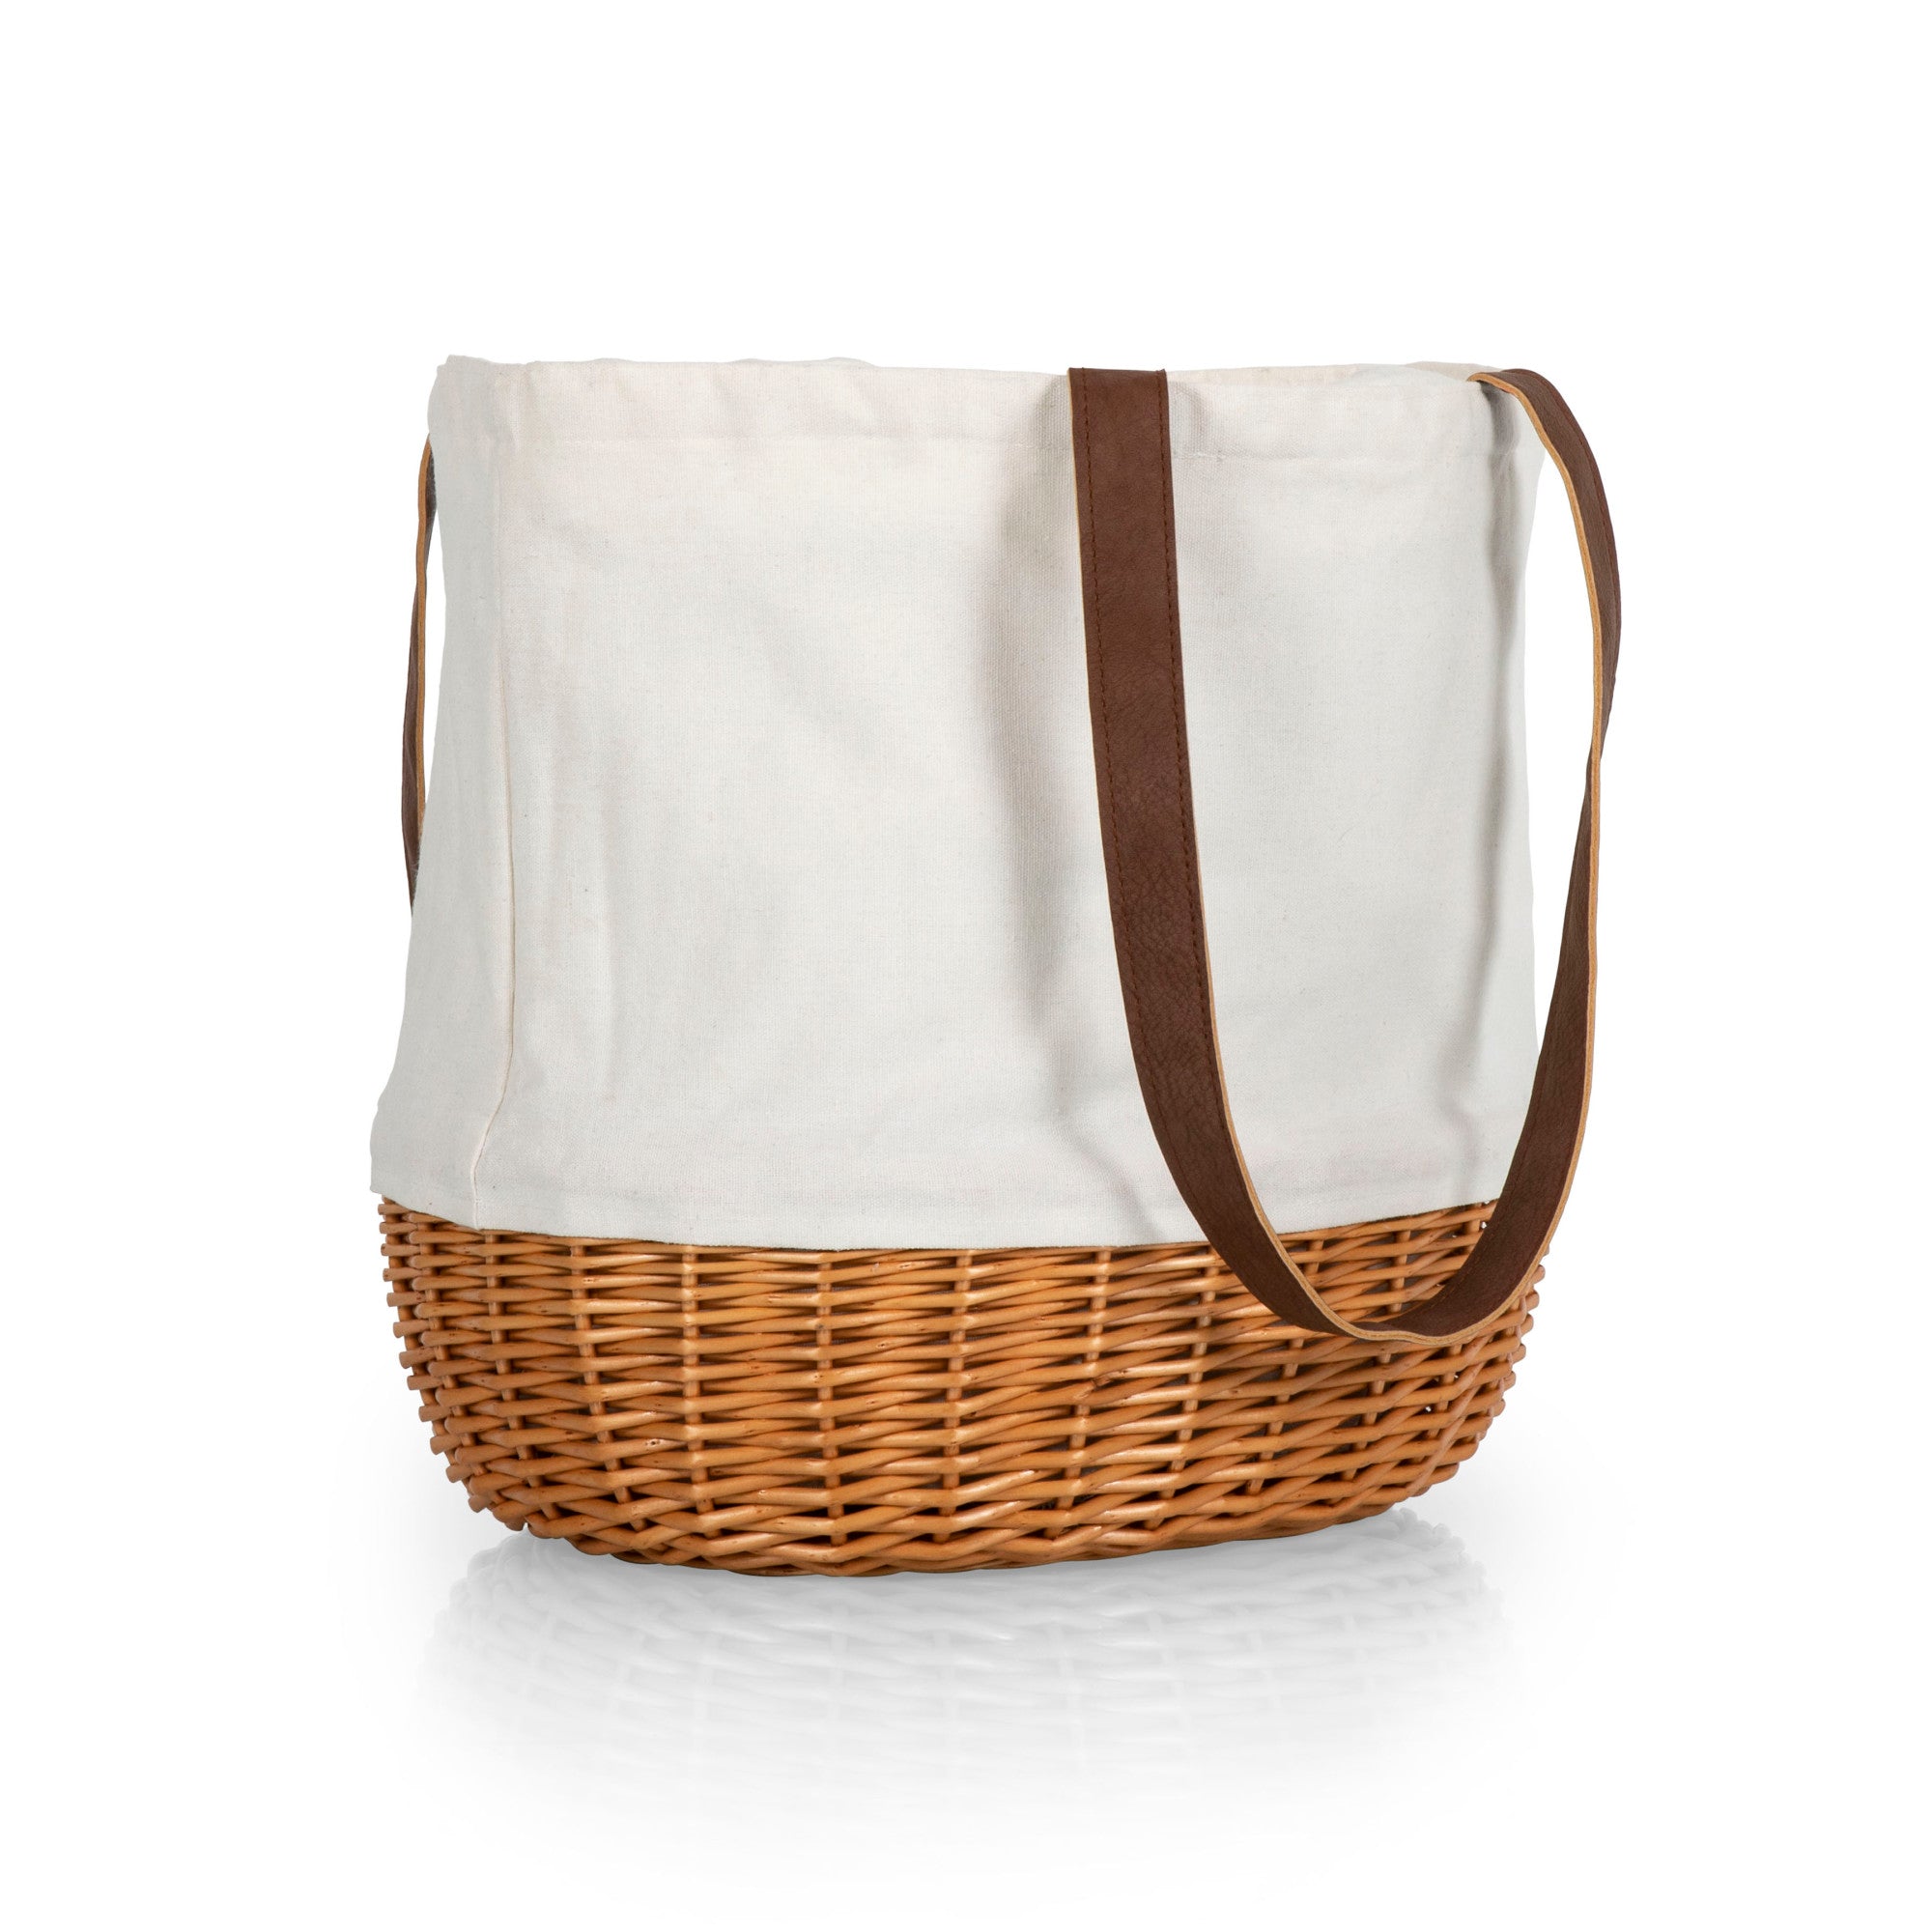 Central Perk - Friends - Coronado Canvas and Willow Basket Tote